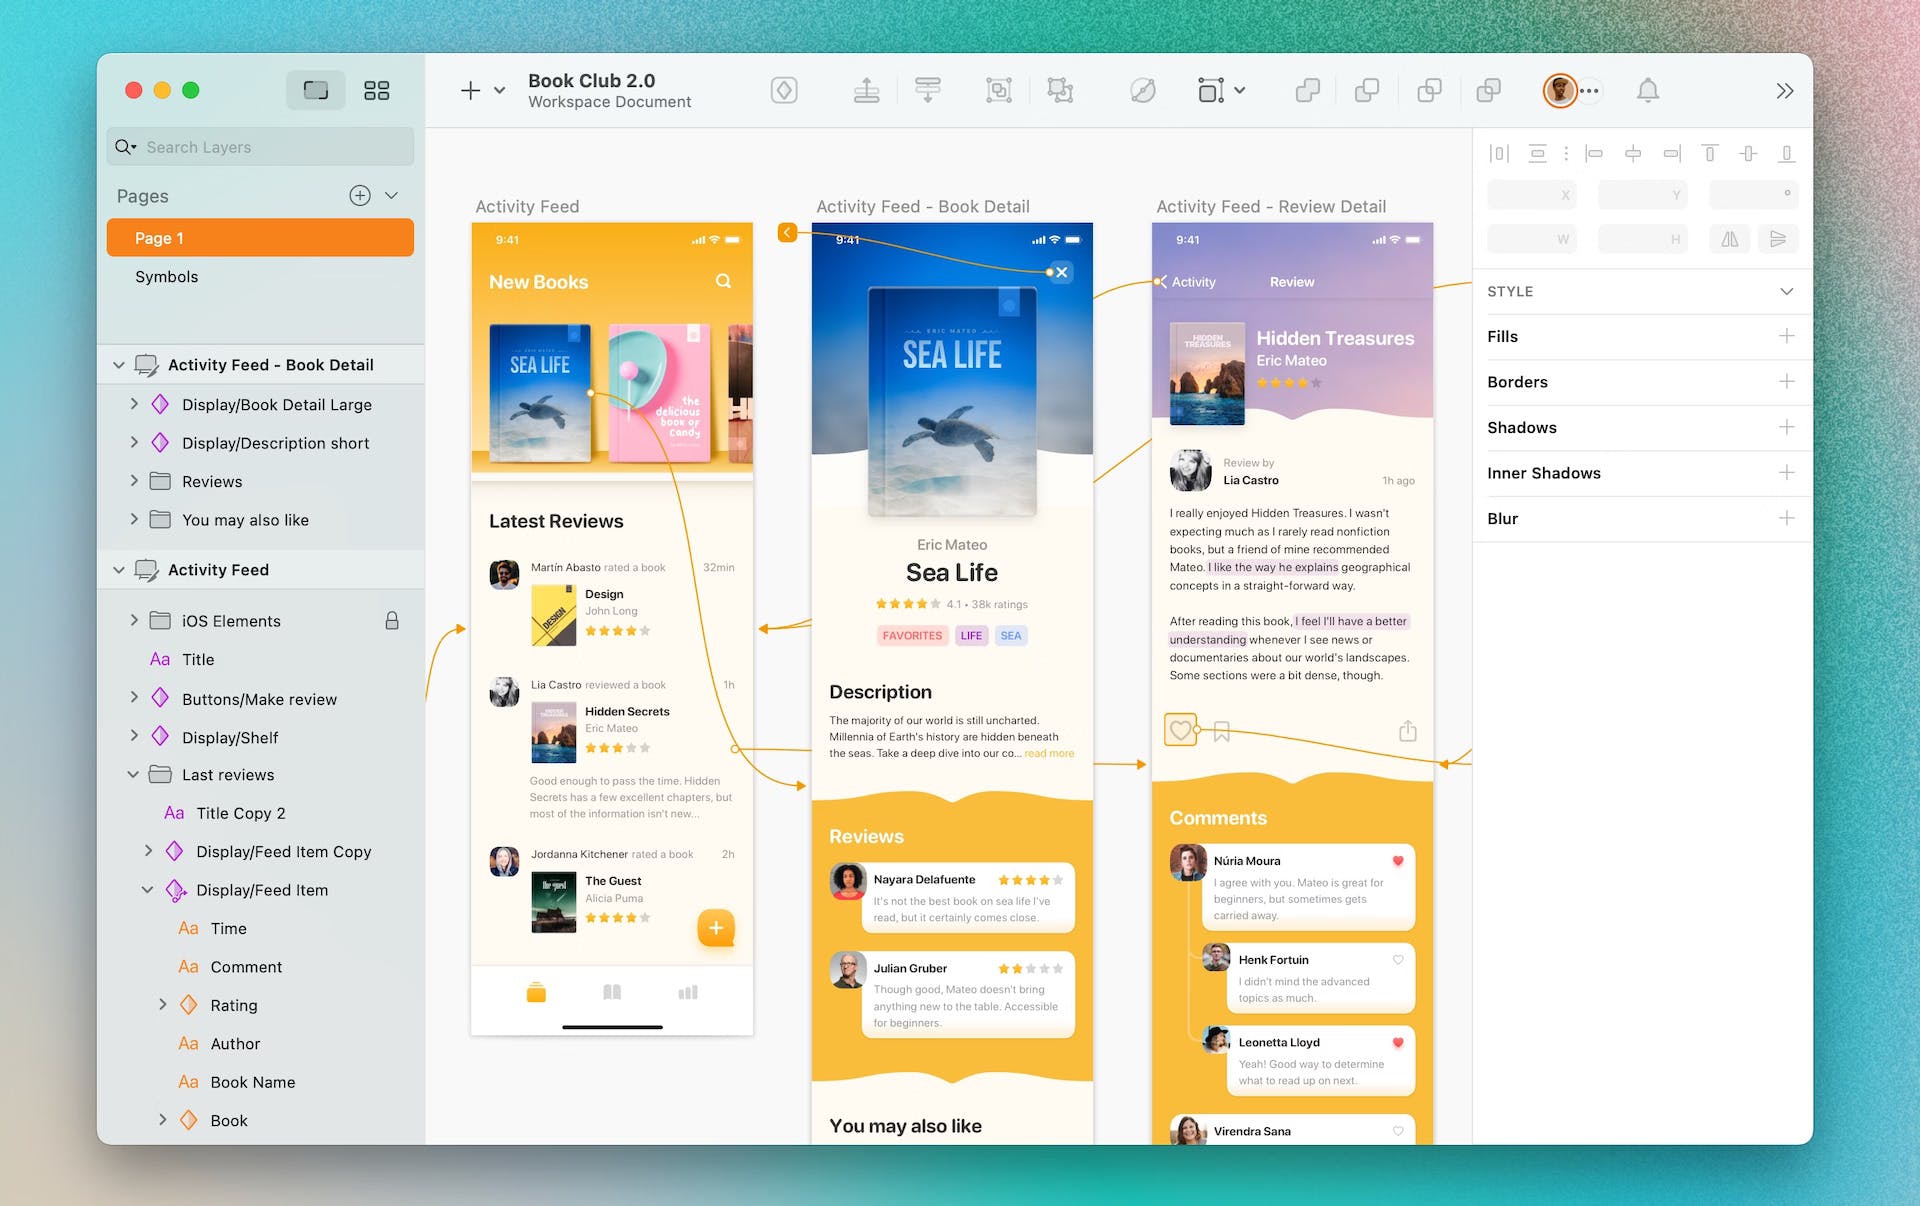 Learn how to design interactive prototypes, wireframes, and